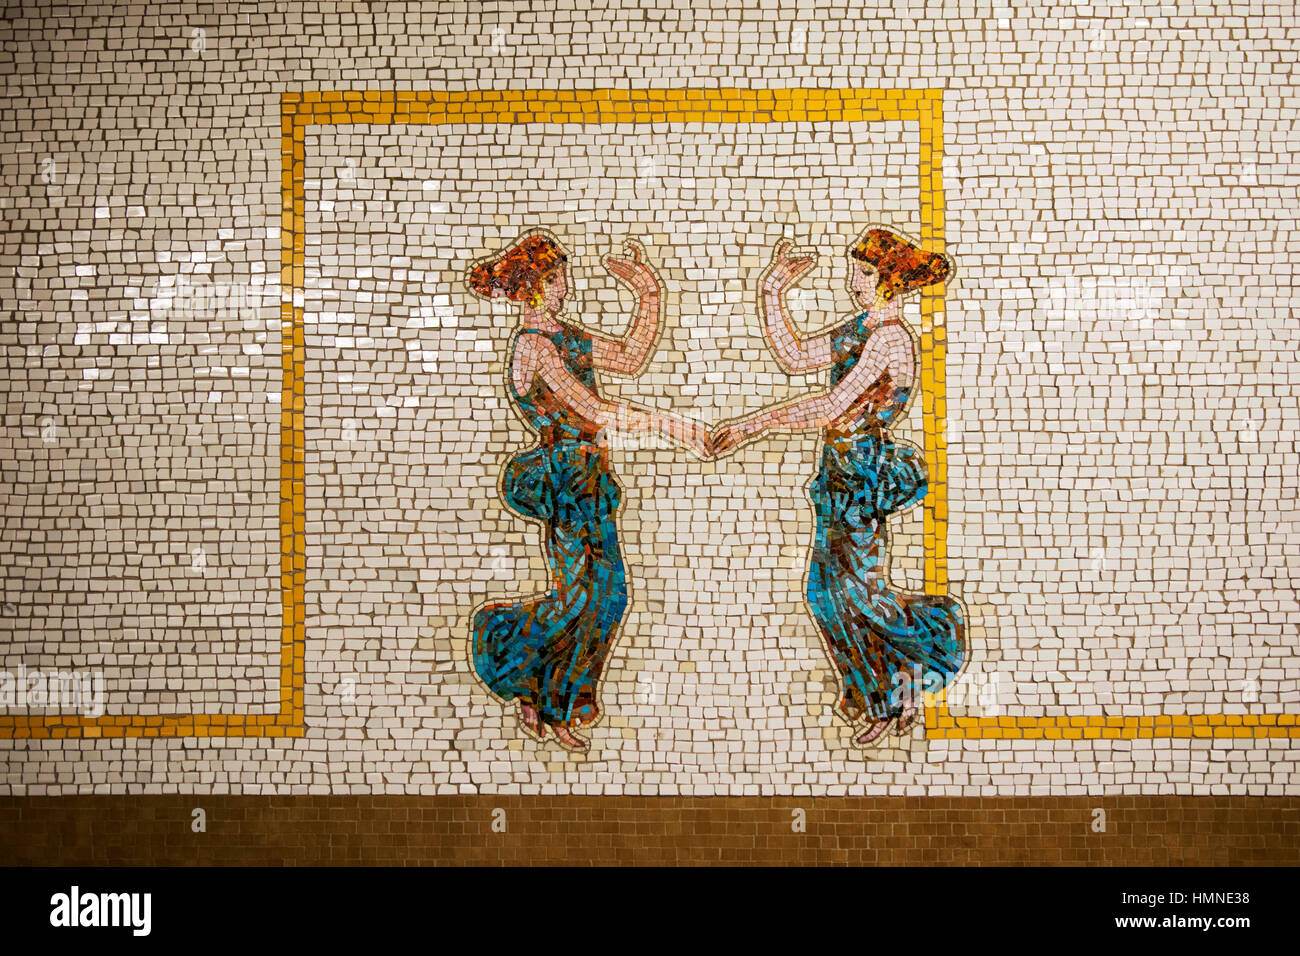 Mosaic art installation at West 66th Street Lincoln Center station on the 1 line on the Upper West Side of Manhattan, New York City. Stock Photo